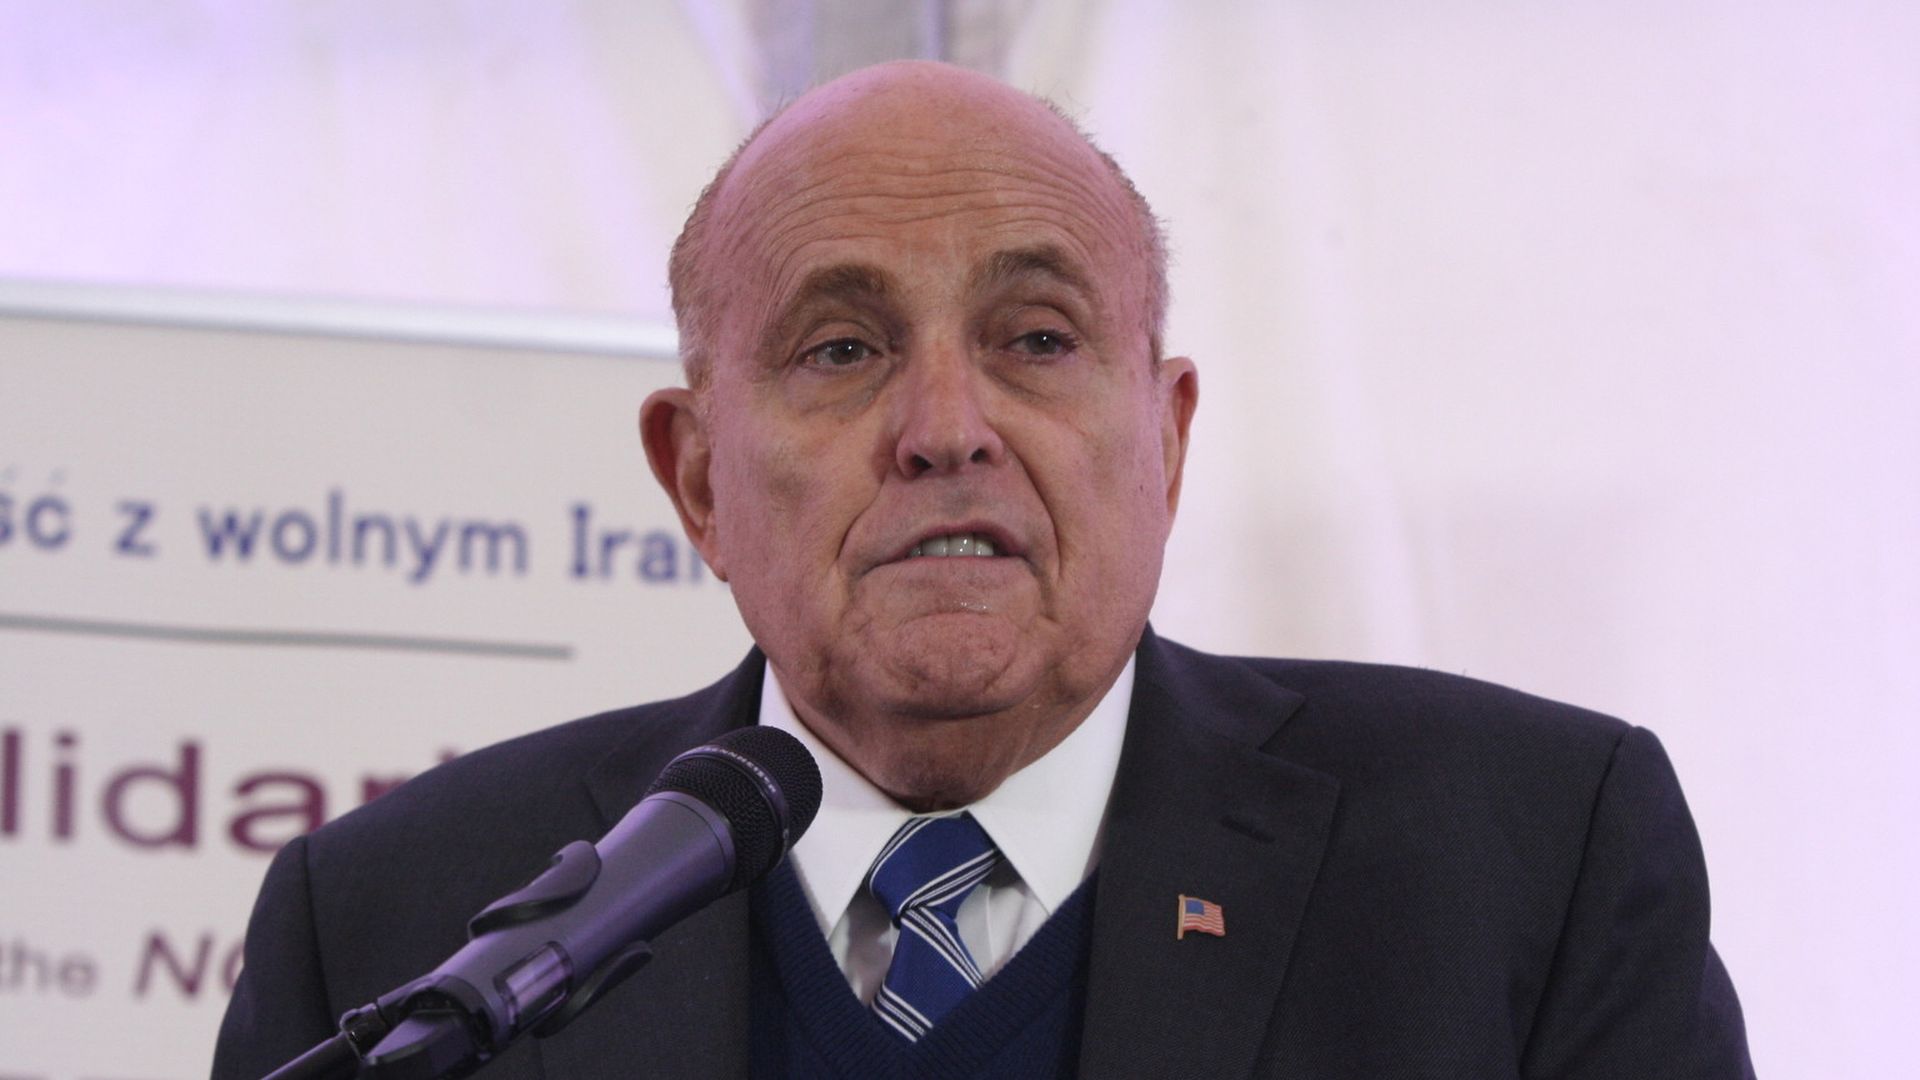 Rudy Giuliani says President Trump won't look at the issue of granting pardons until the Mueller probe concludes.